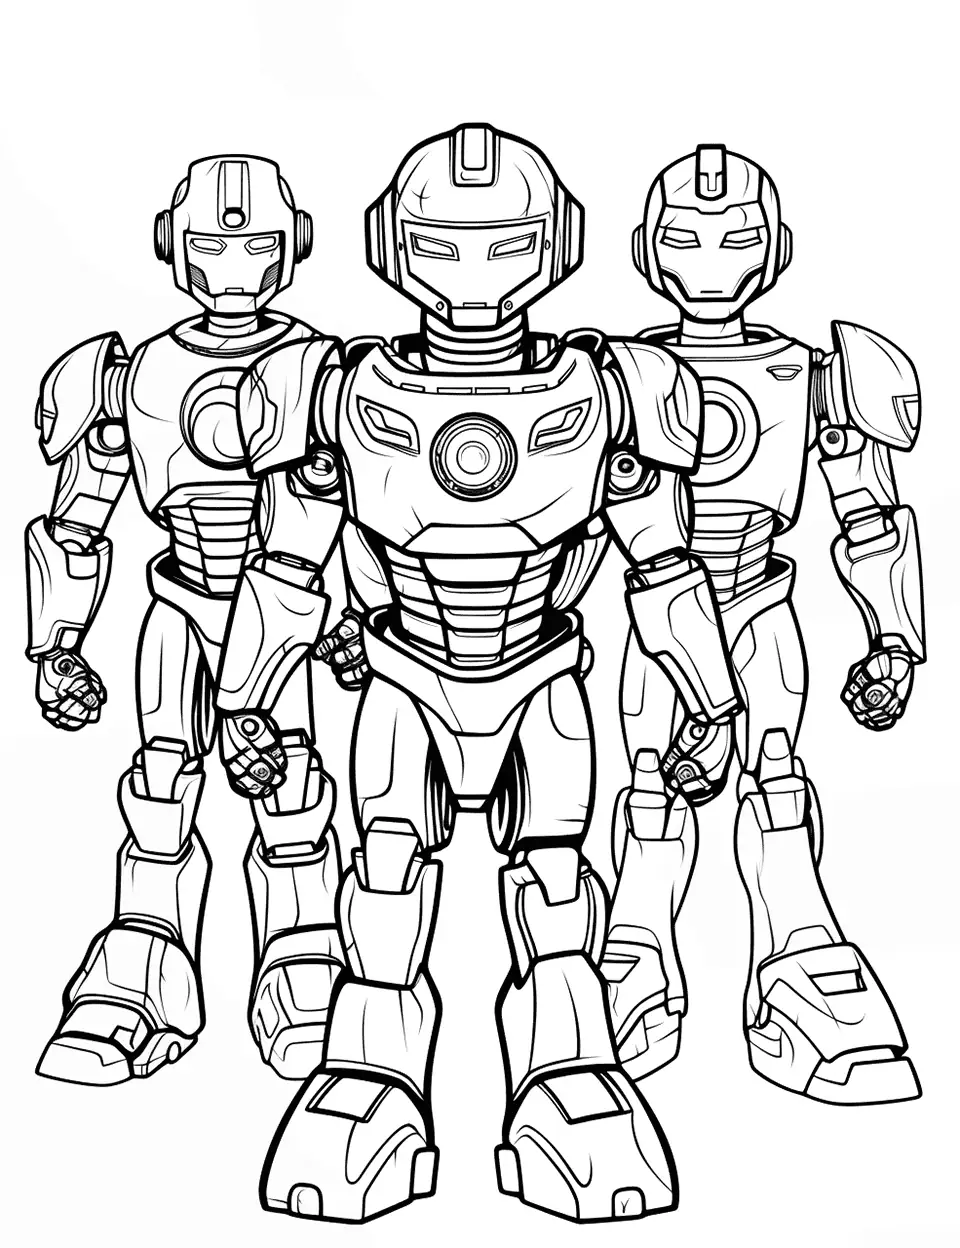 Power Rangers' Robot Team Coloring Page - Power Ranger Robot team standing together in formation.